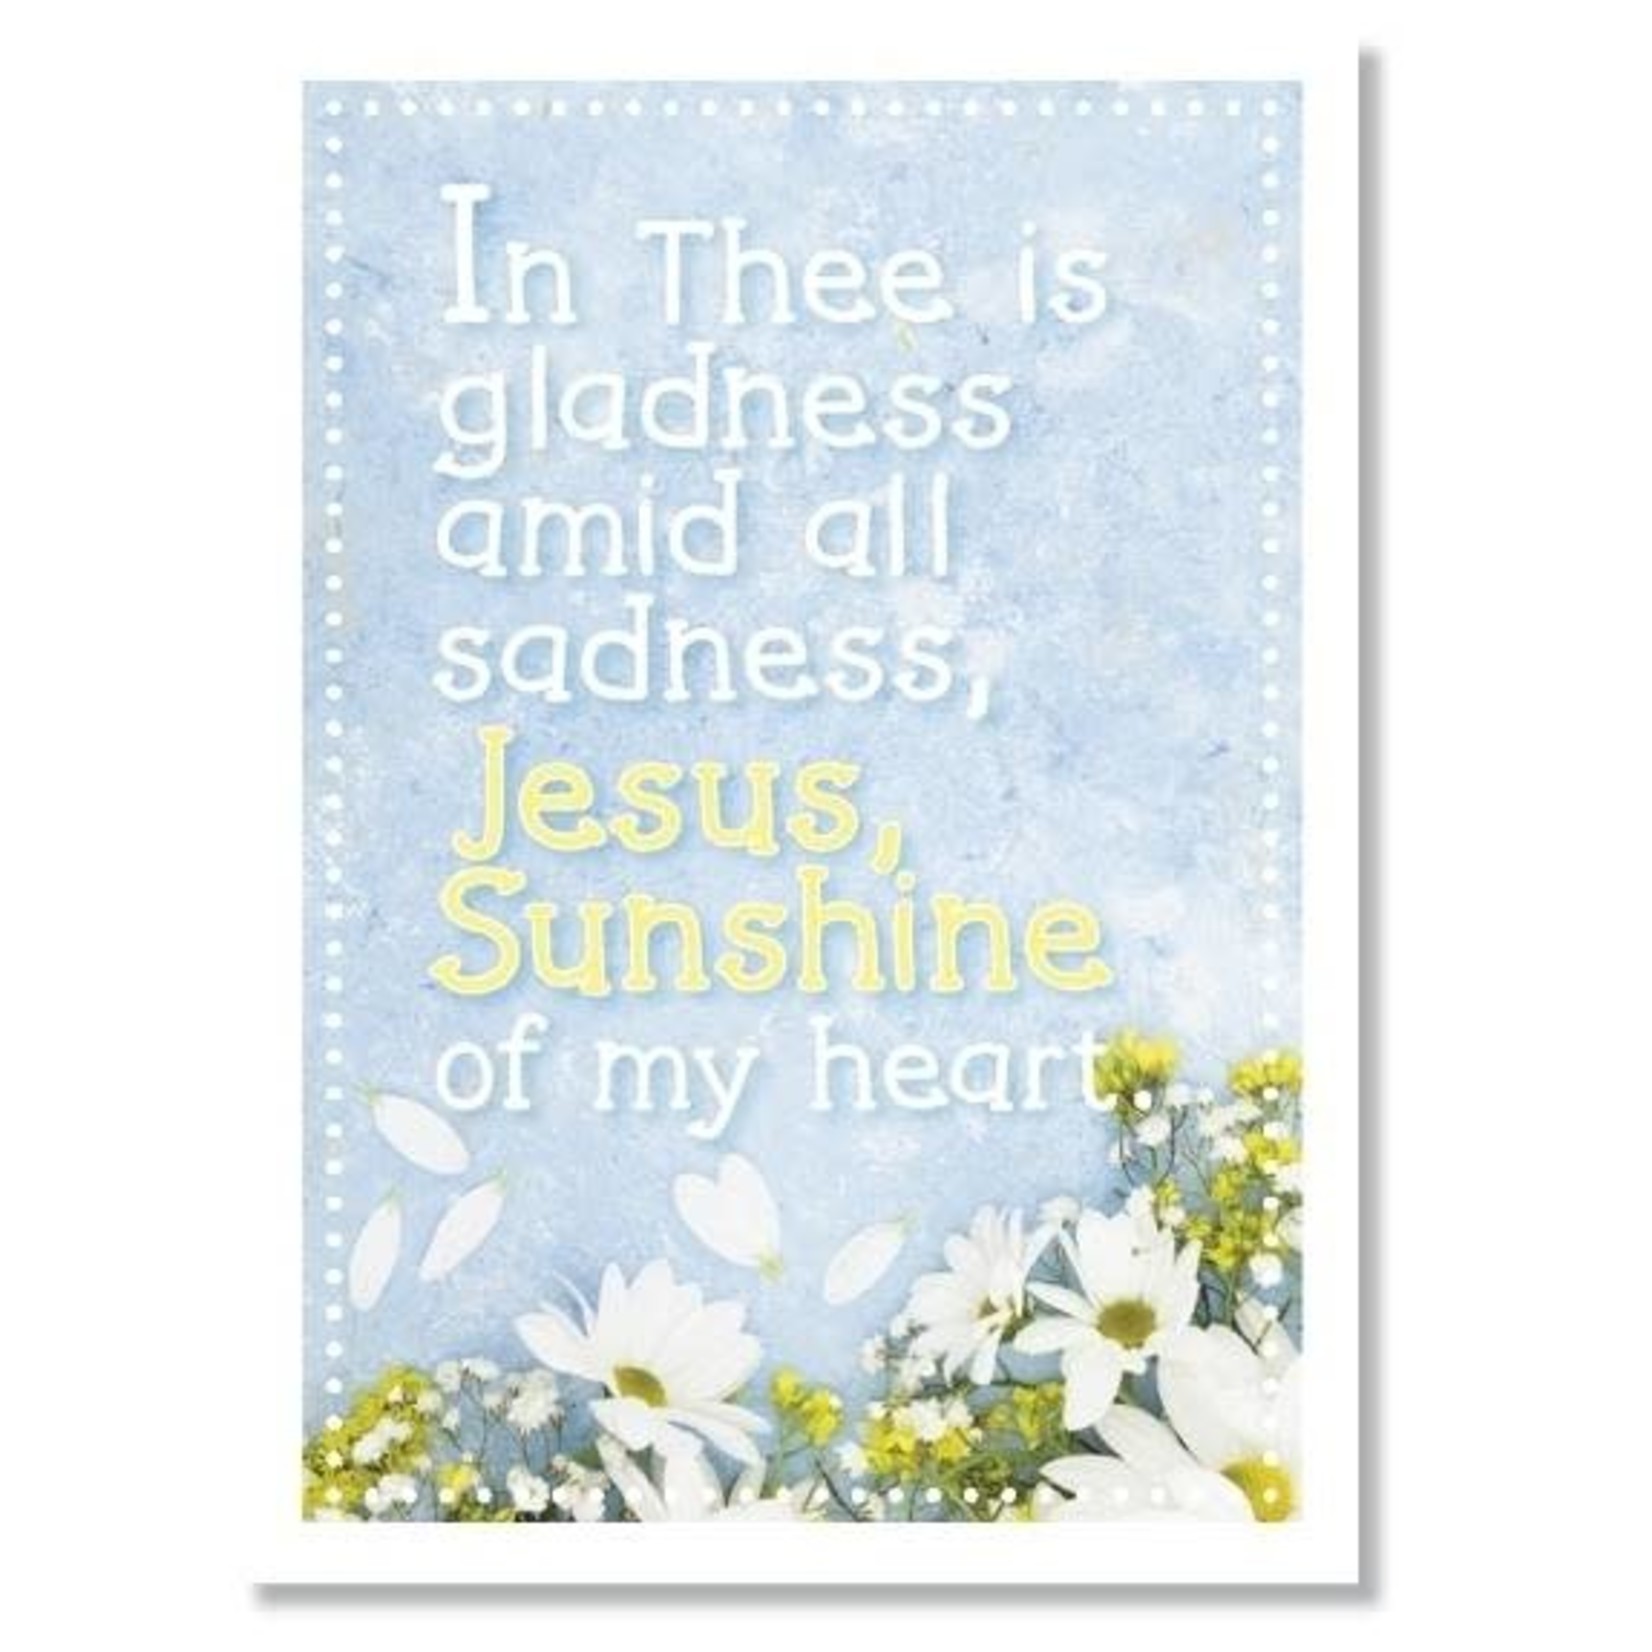 Hymns In My Heart - 5x7" Greeting Card - Wedding - In Thee is Gladness